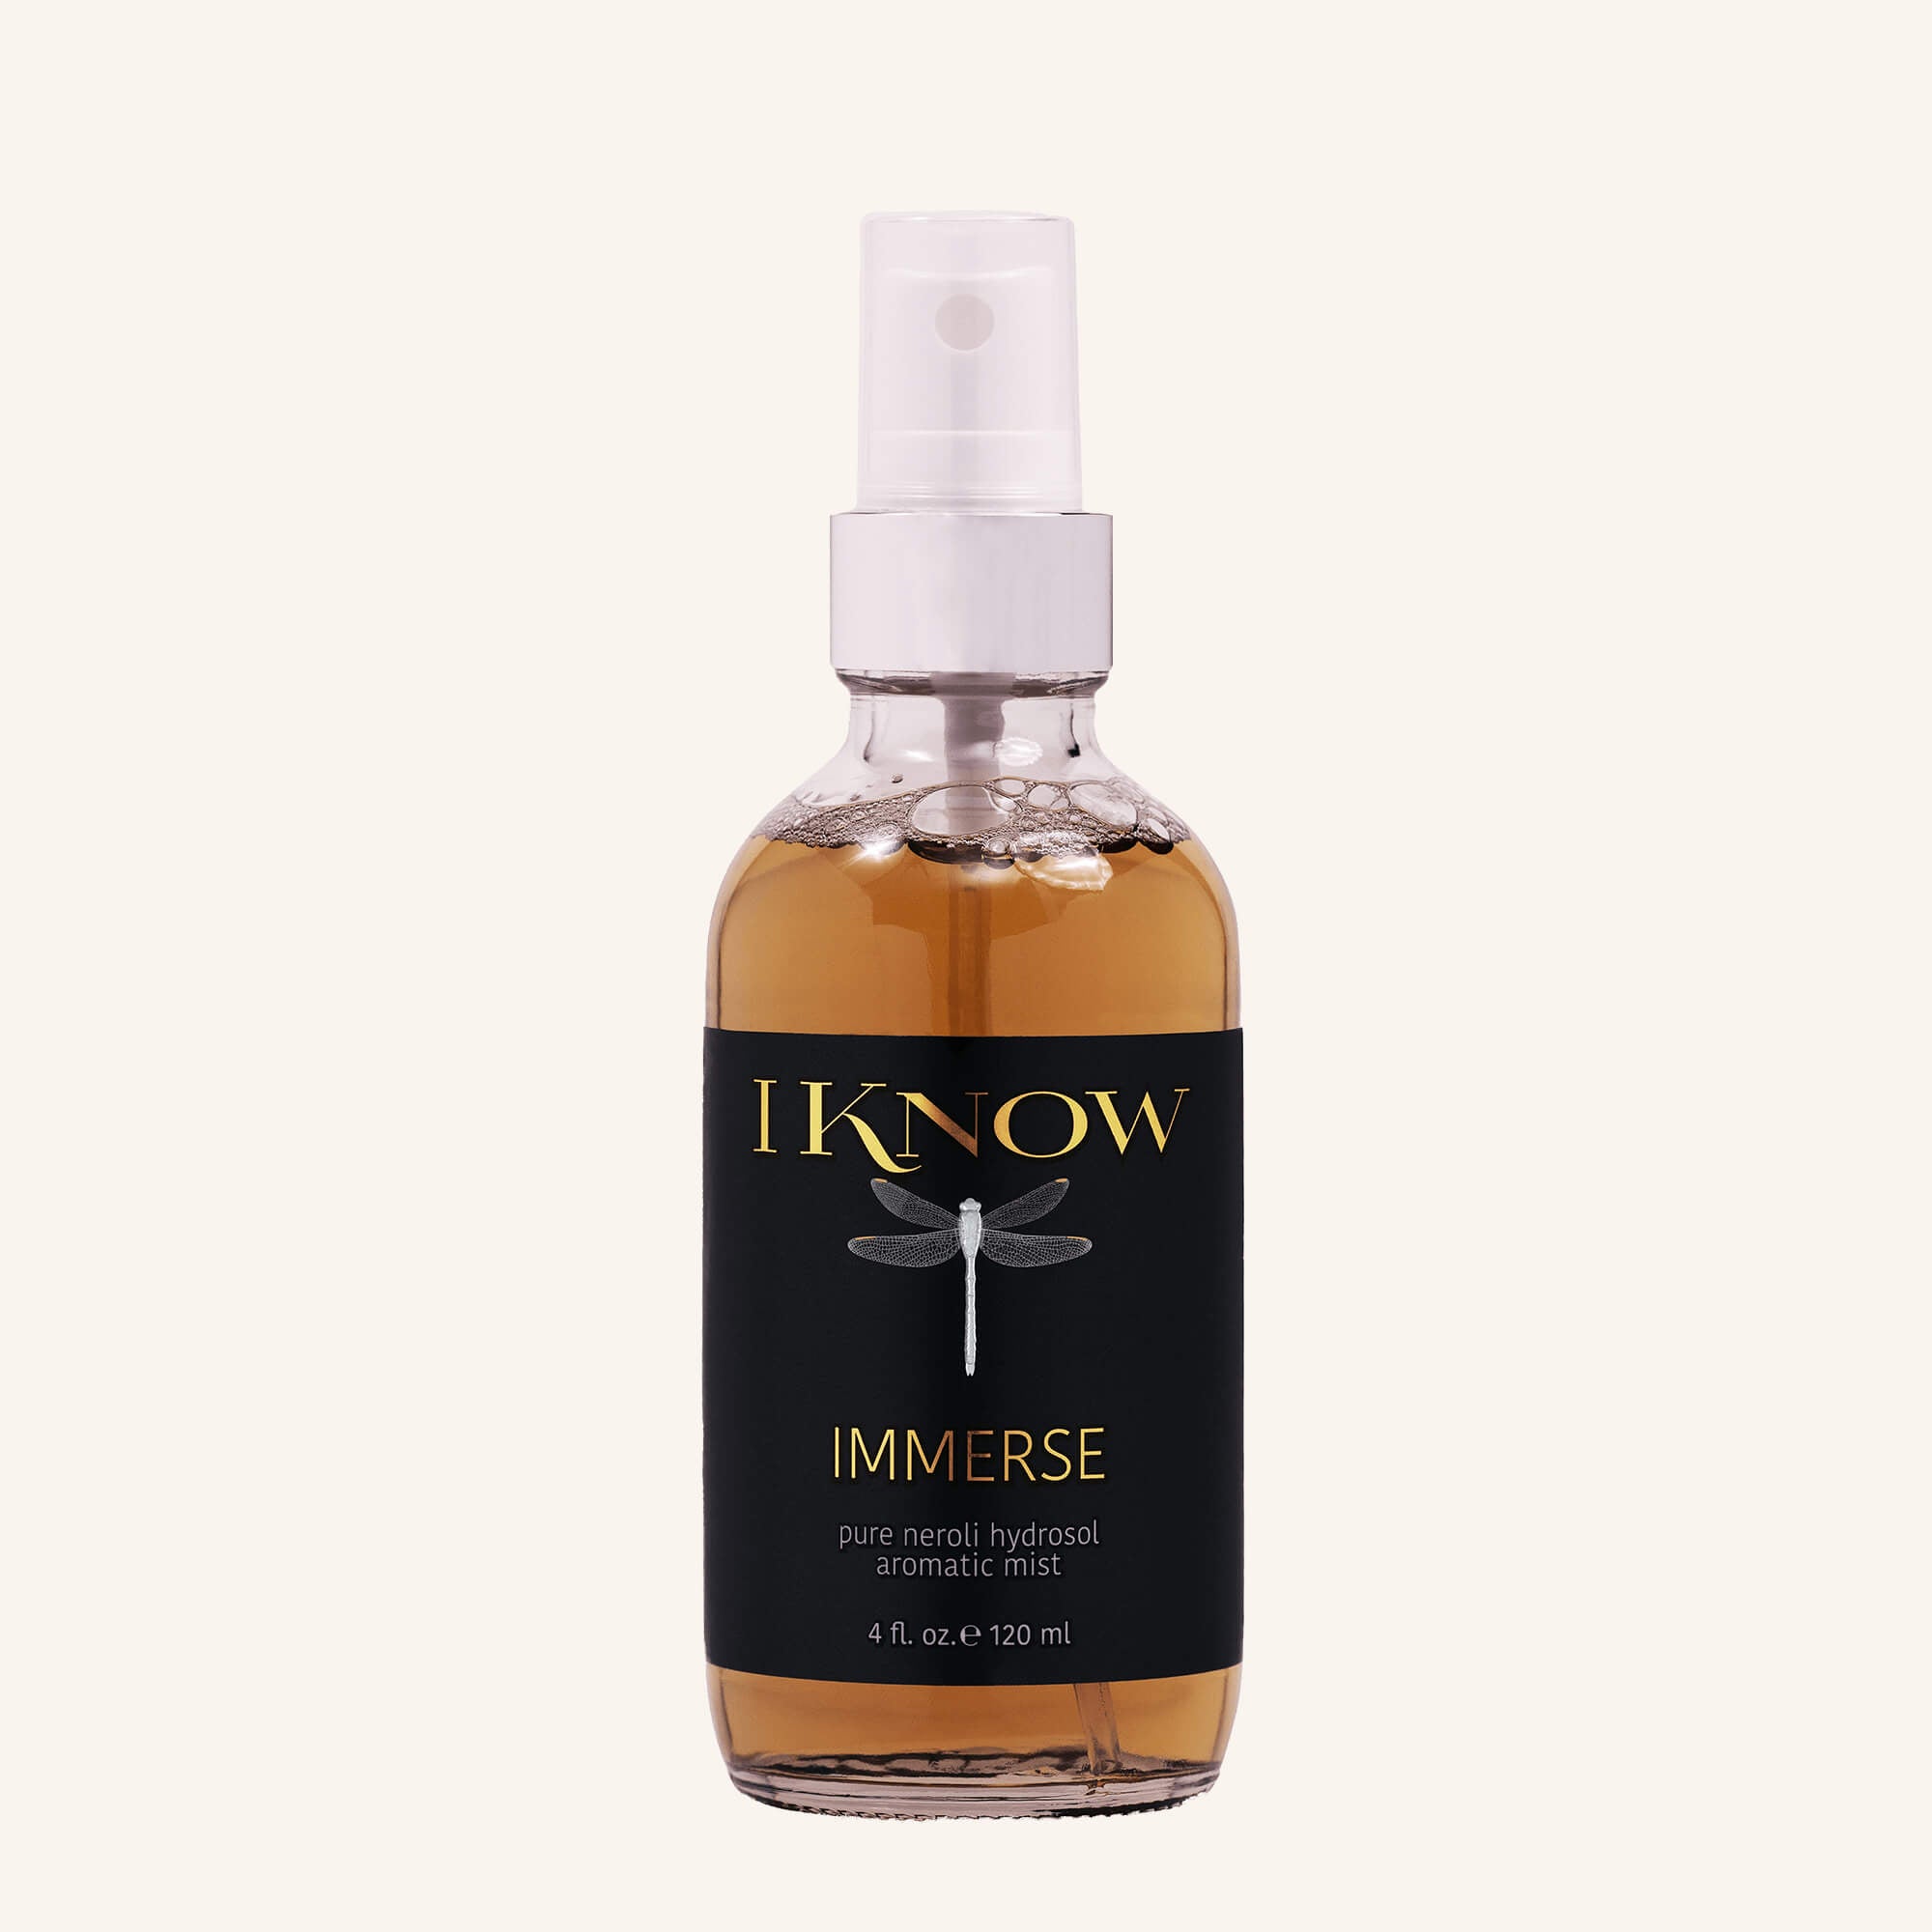 IKNOW Immerse Pure Neroli Oil Mist helps tone, balance and calm skin